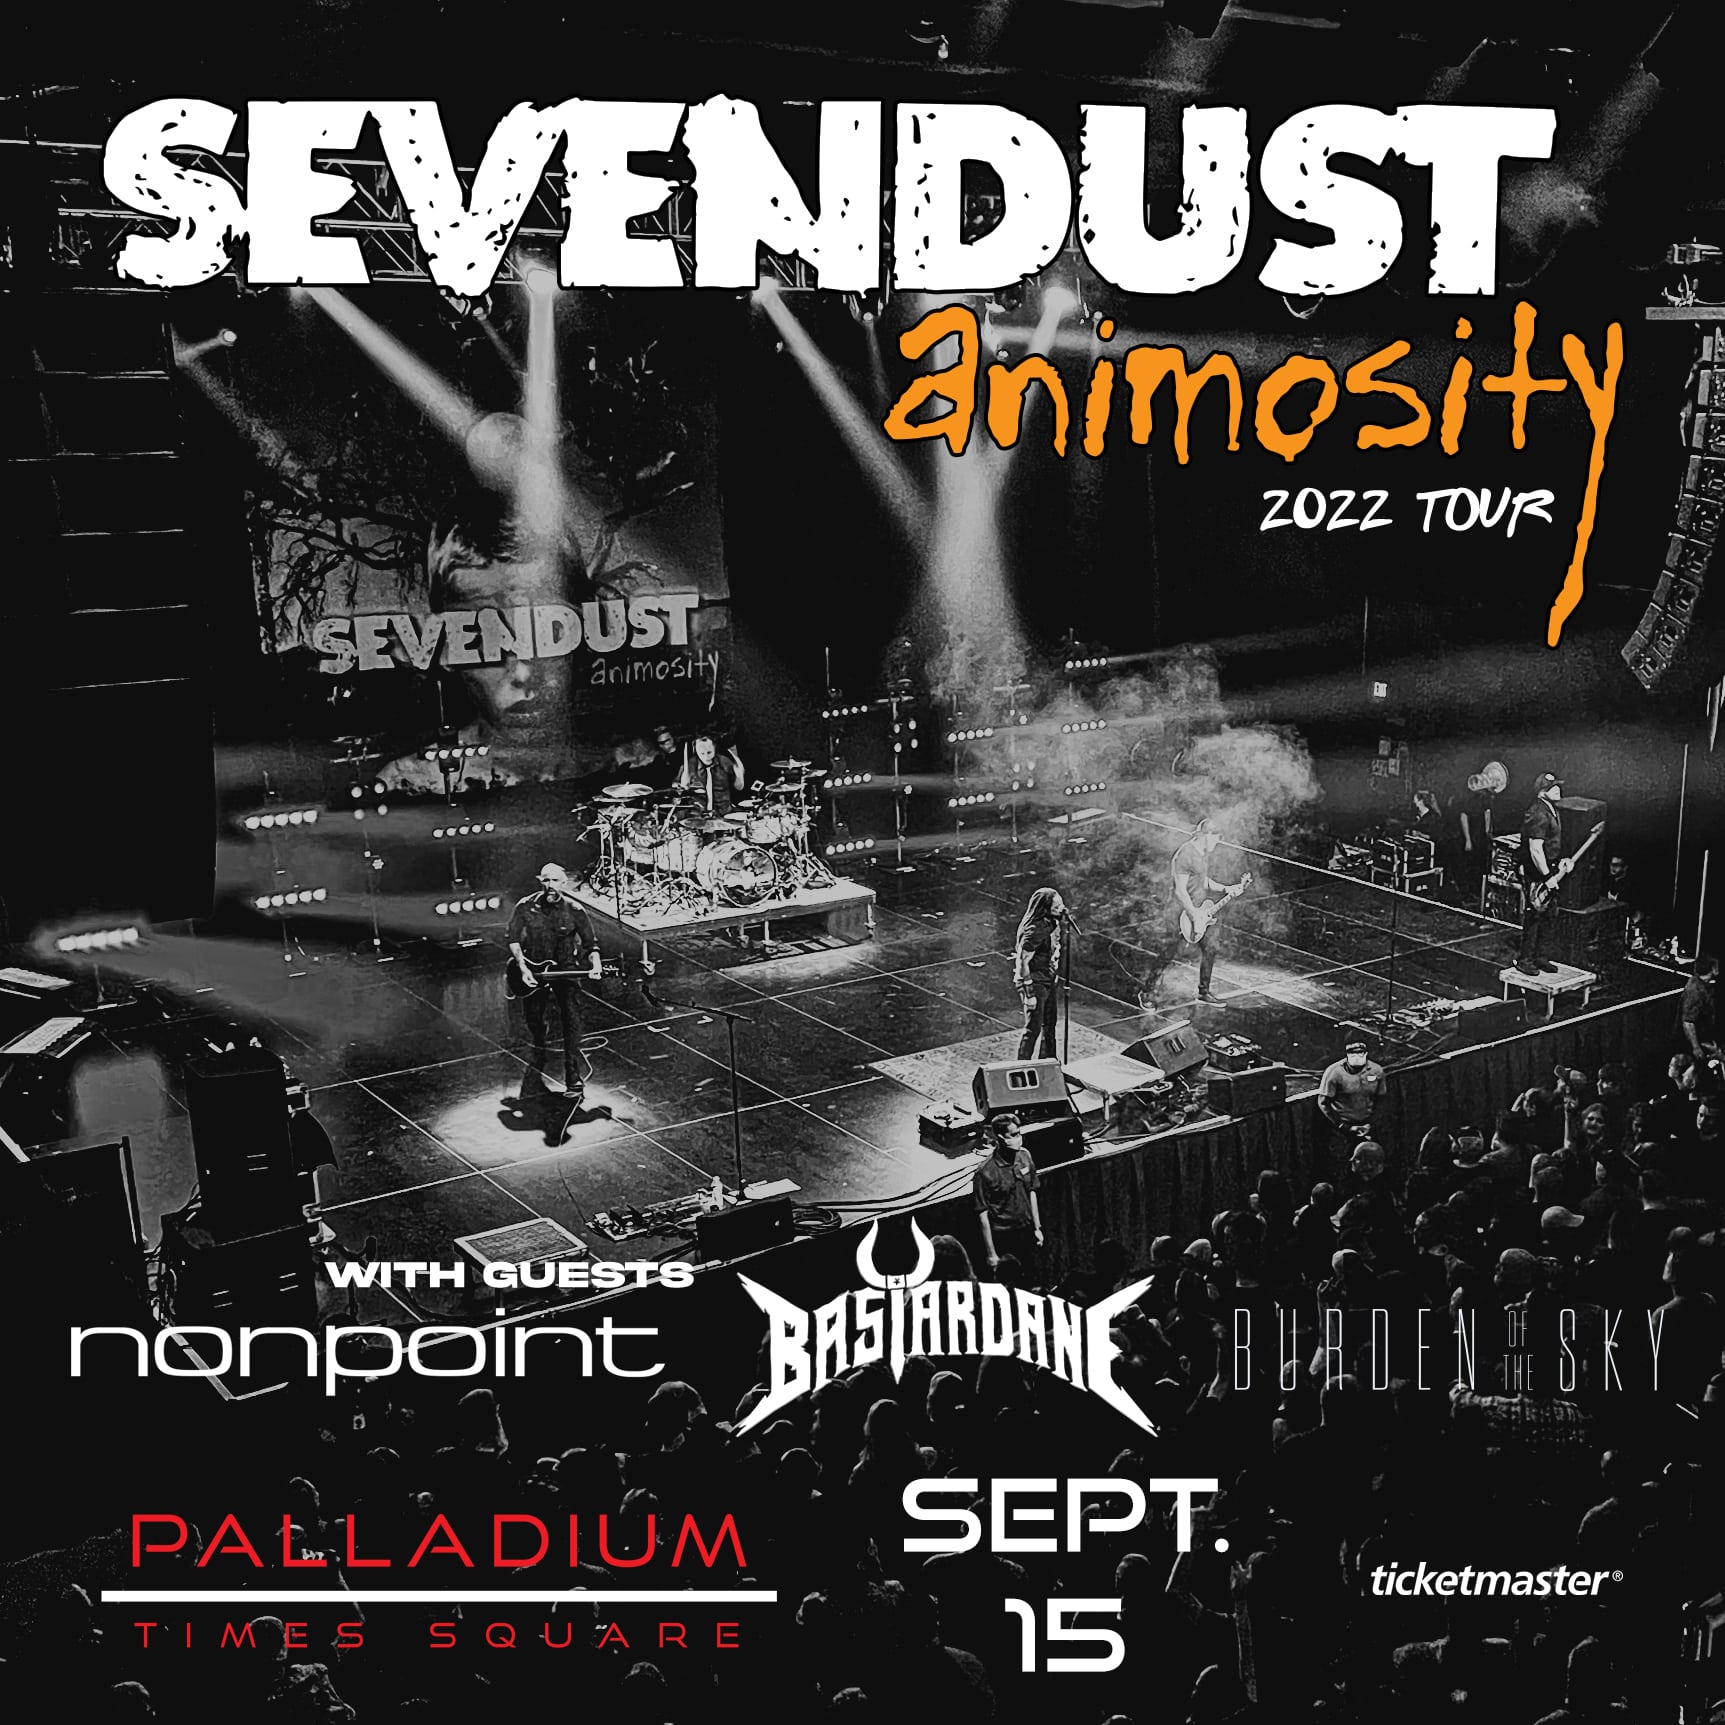 SEVENDUST WITH NONPOINT, BASTARDANE, AND BURDEN OF THE SKY